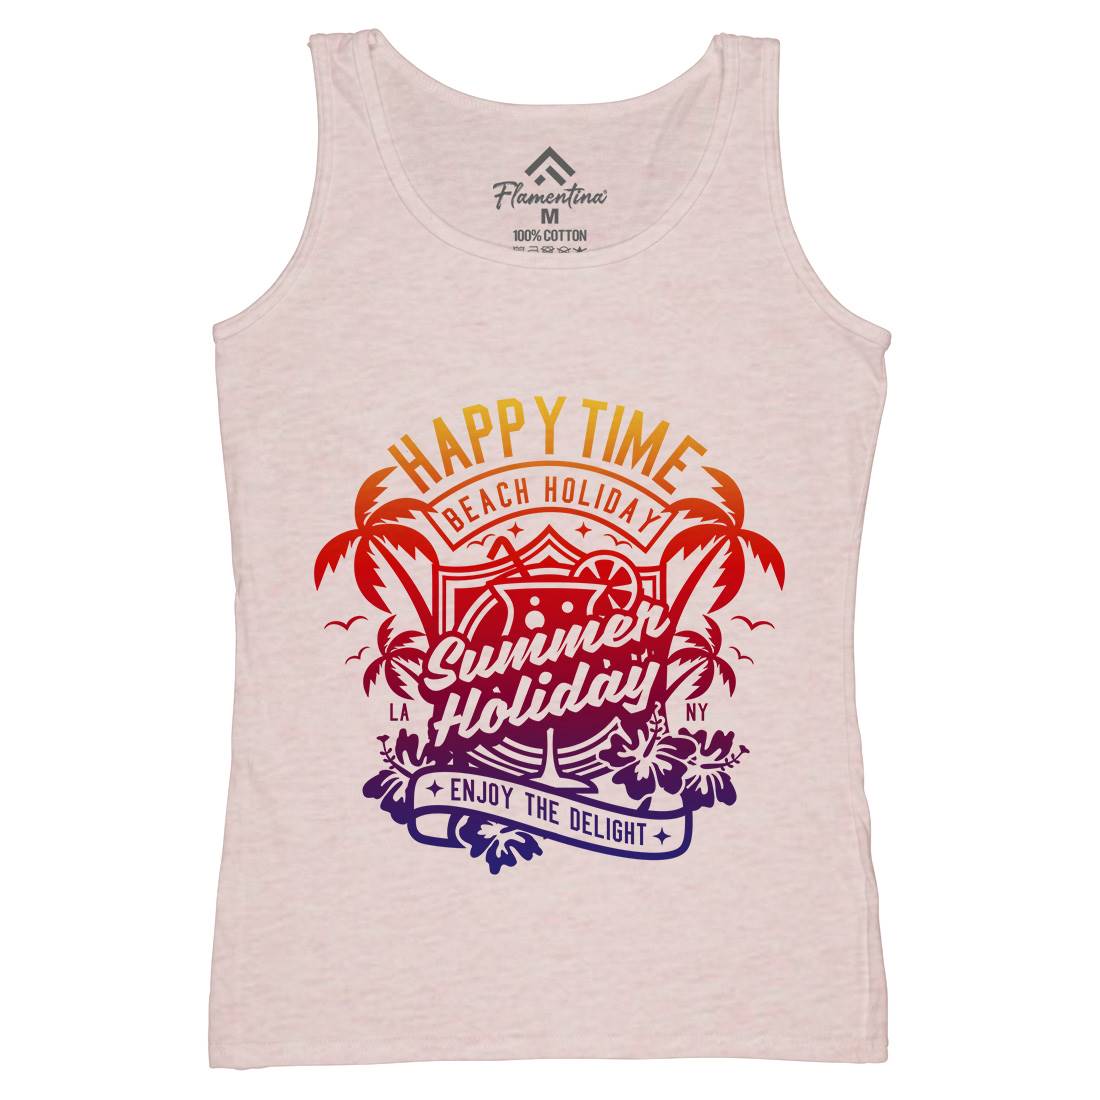 Happy Time Womens Organic Tank Top Vest Surf A238